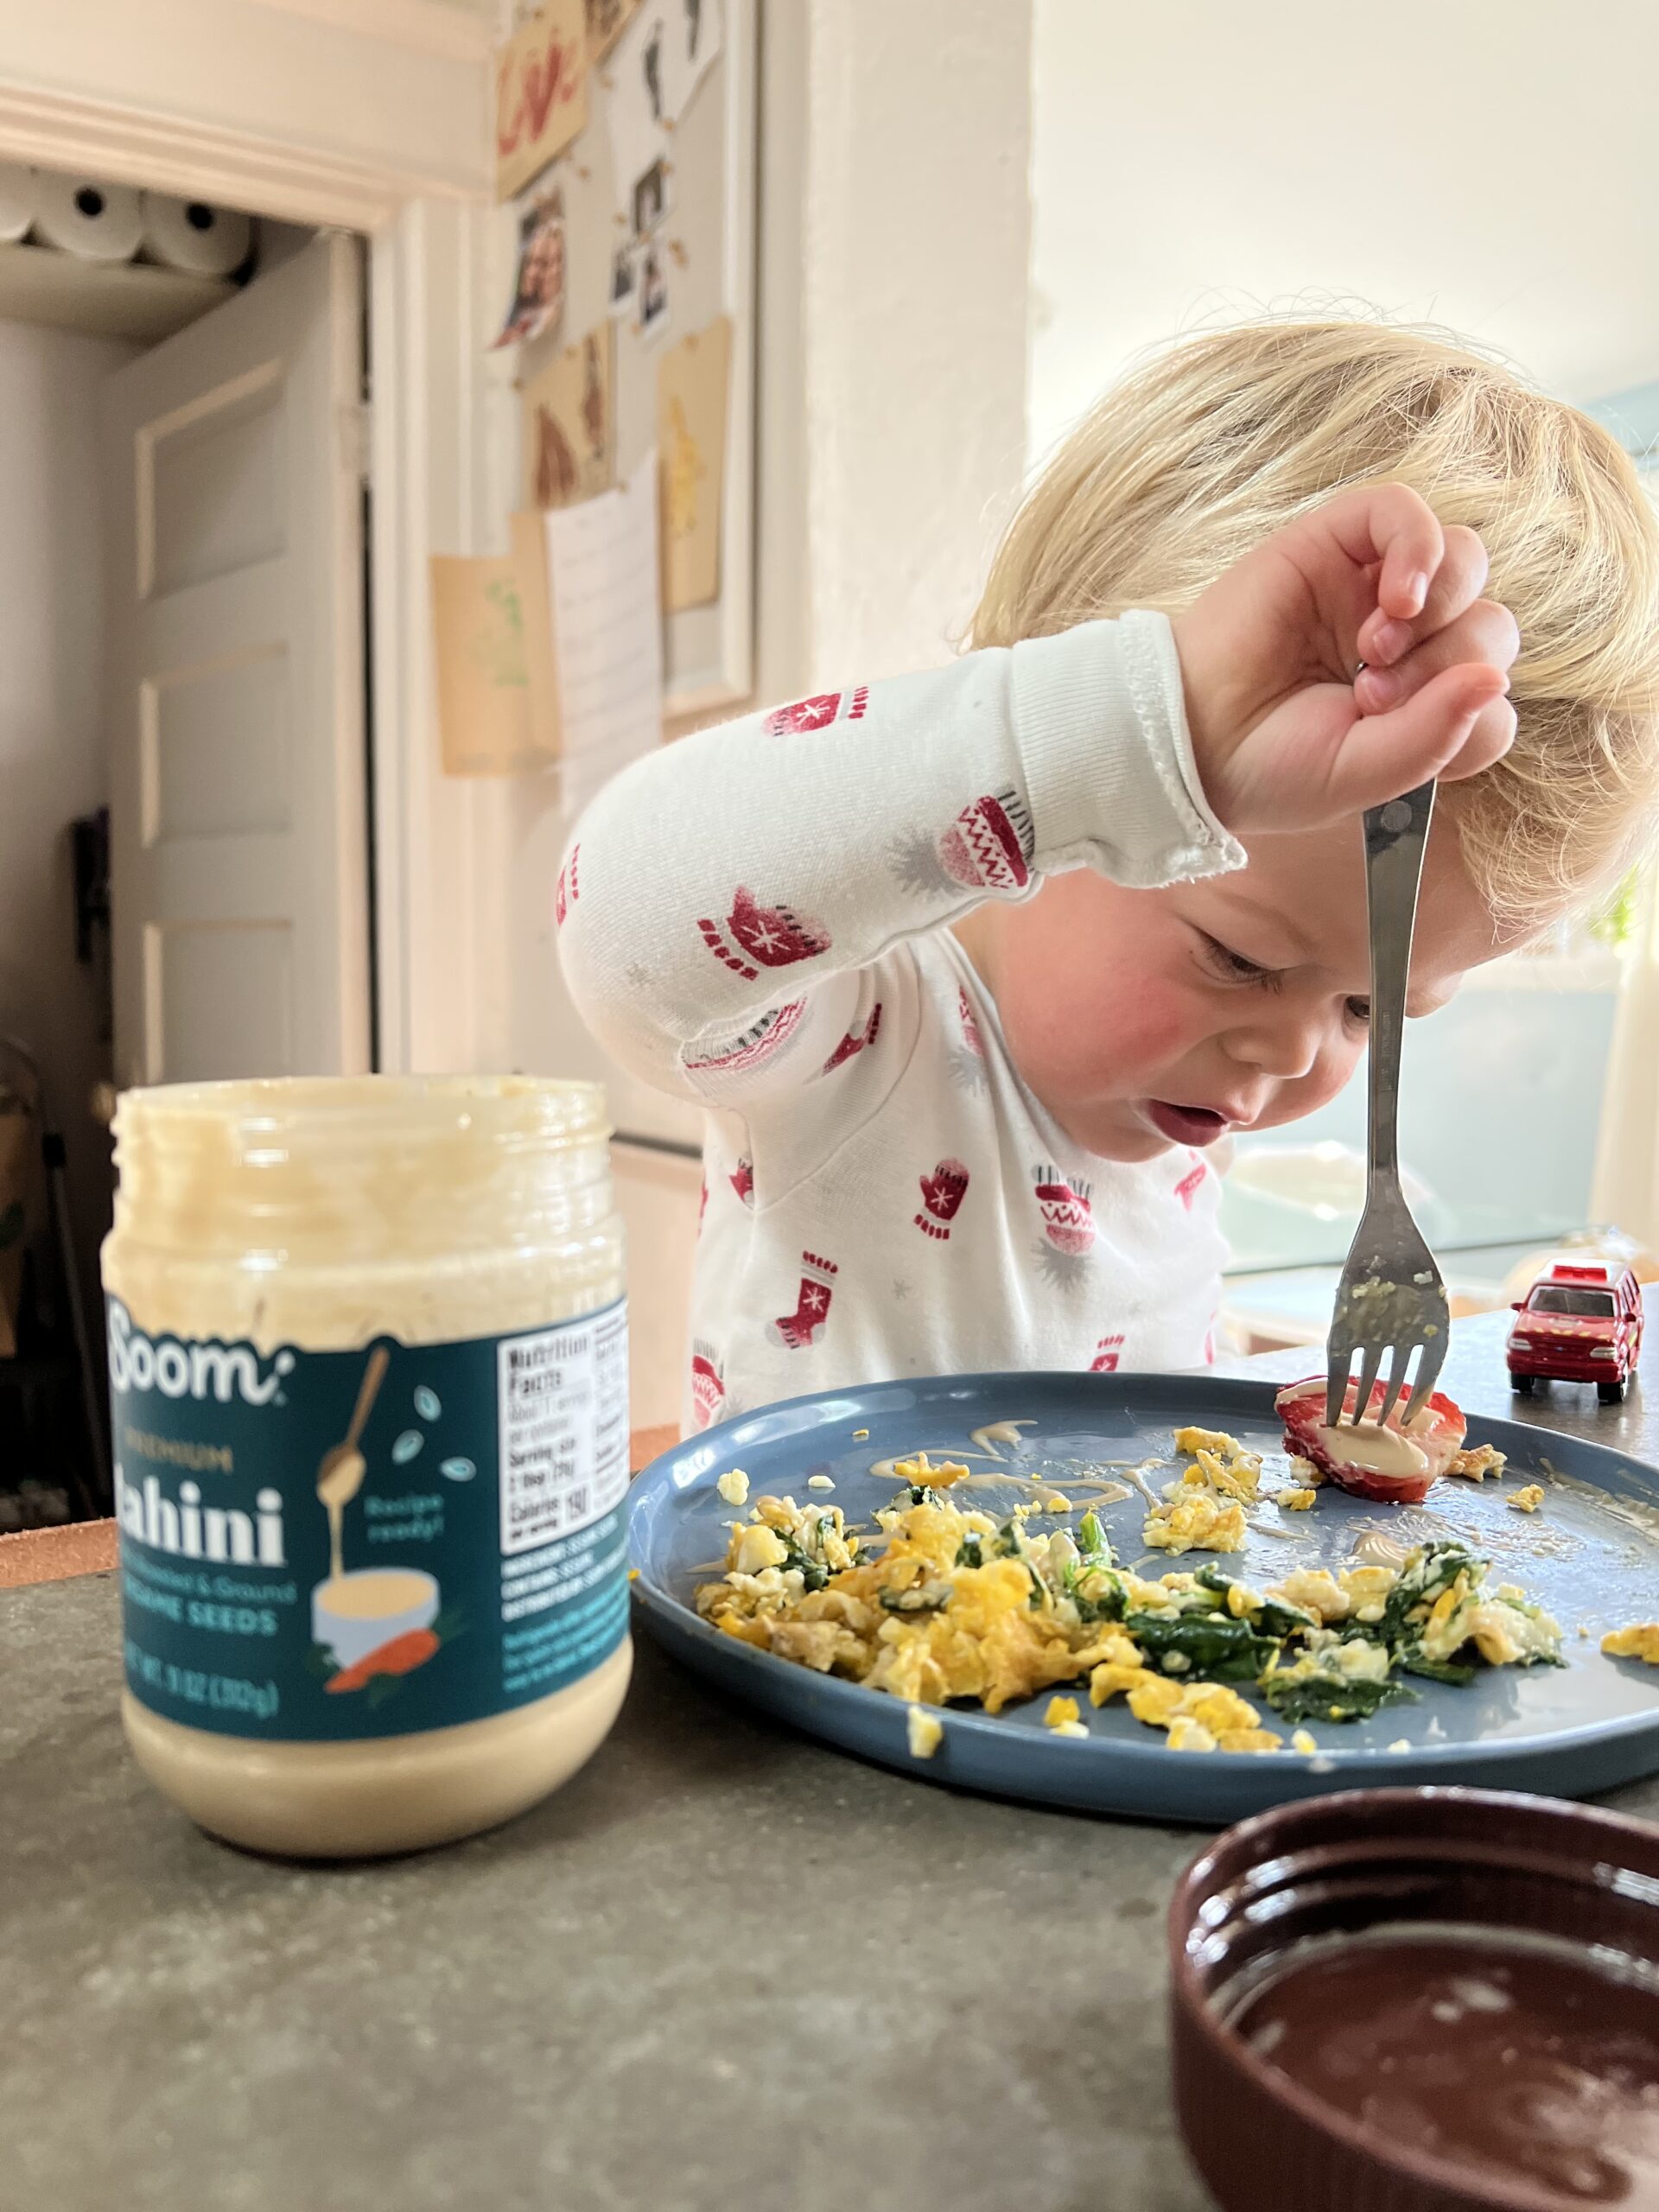 what Nutrients do toddlers need to be healthy?